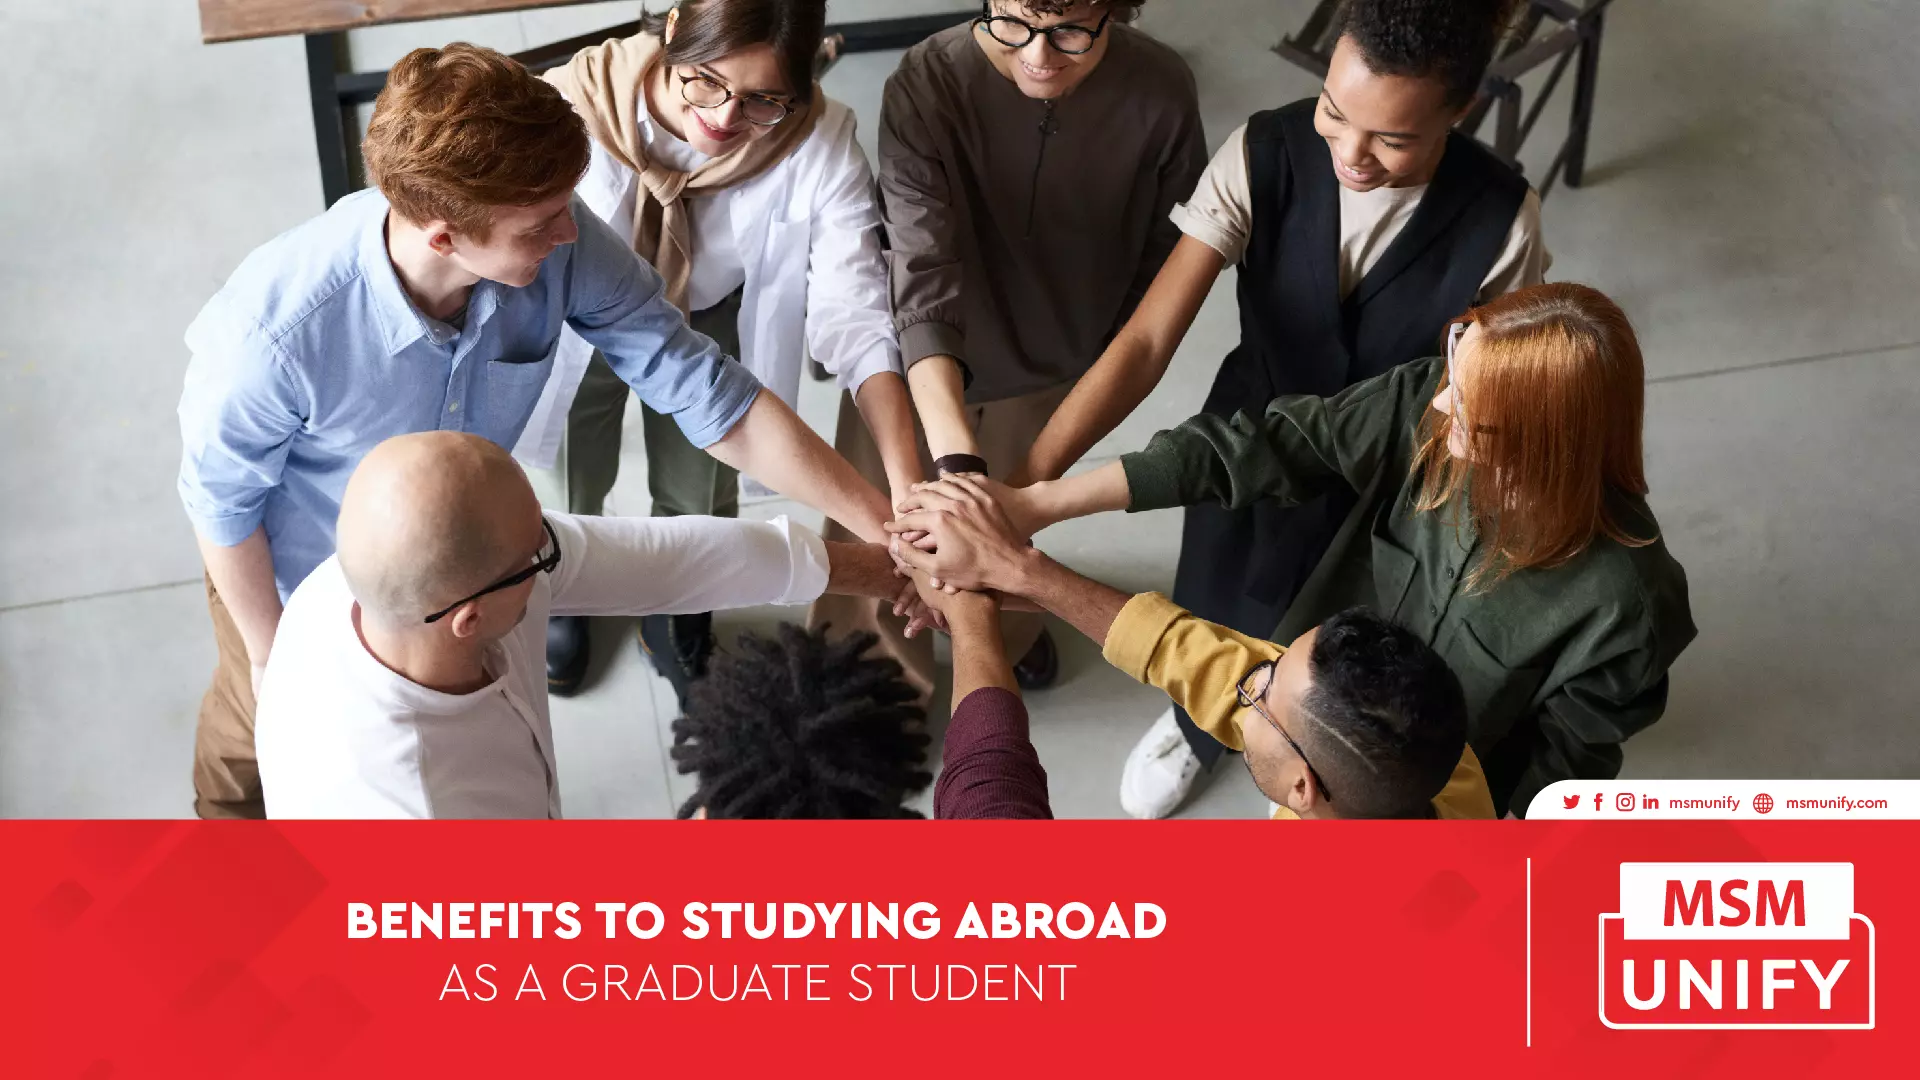 062322 MSM Unify Benefits to Studying Abroad as a Graduate Student 01